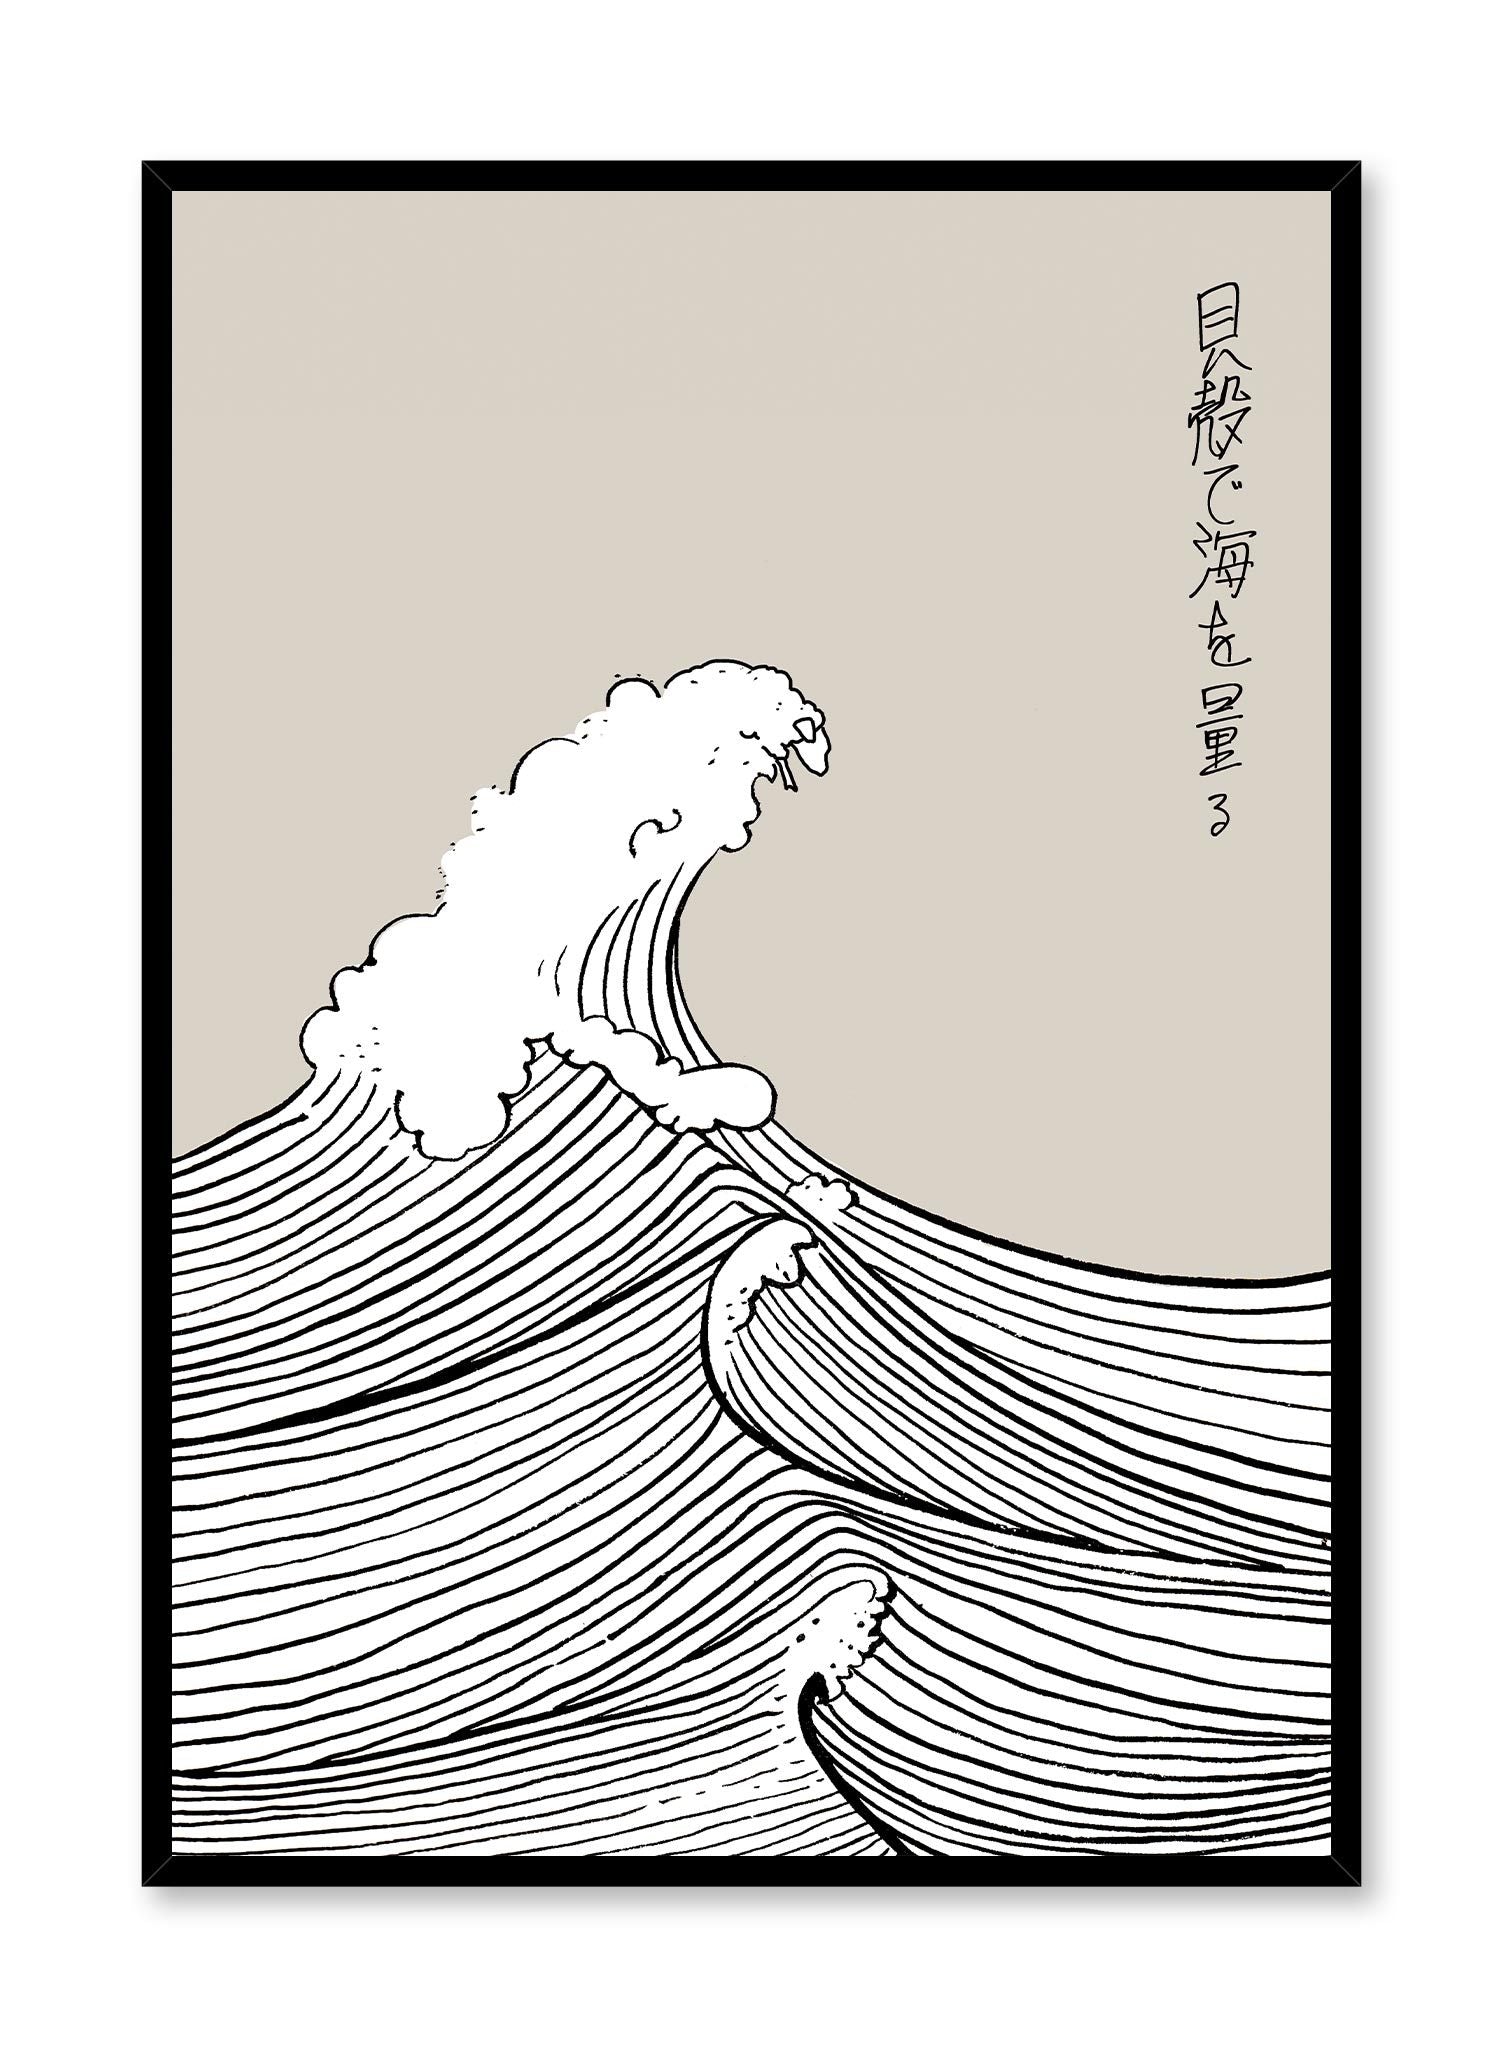 Kanagawa, Simplified is a minimalist illustration by Opposite Wall of a hand drawn tall crashing wave. 